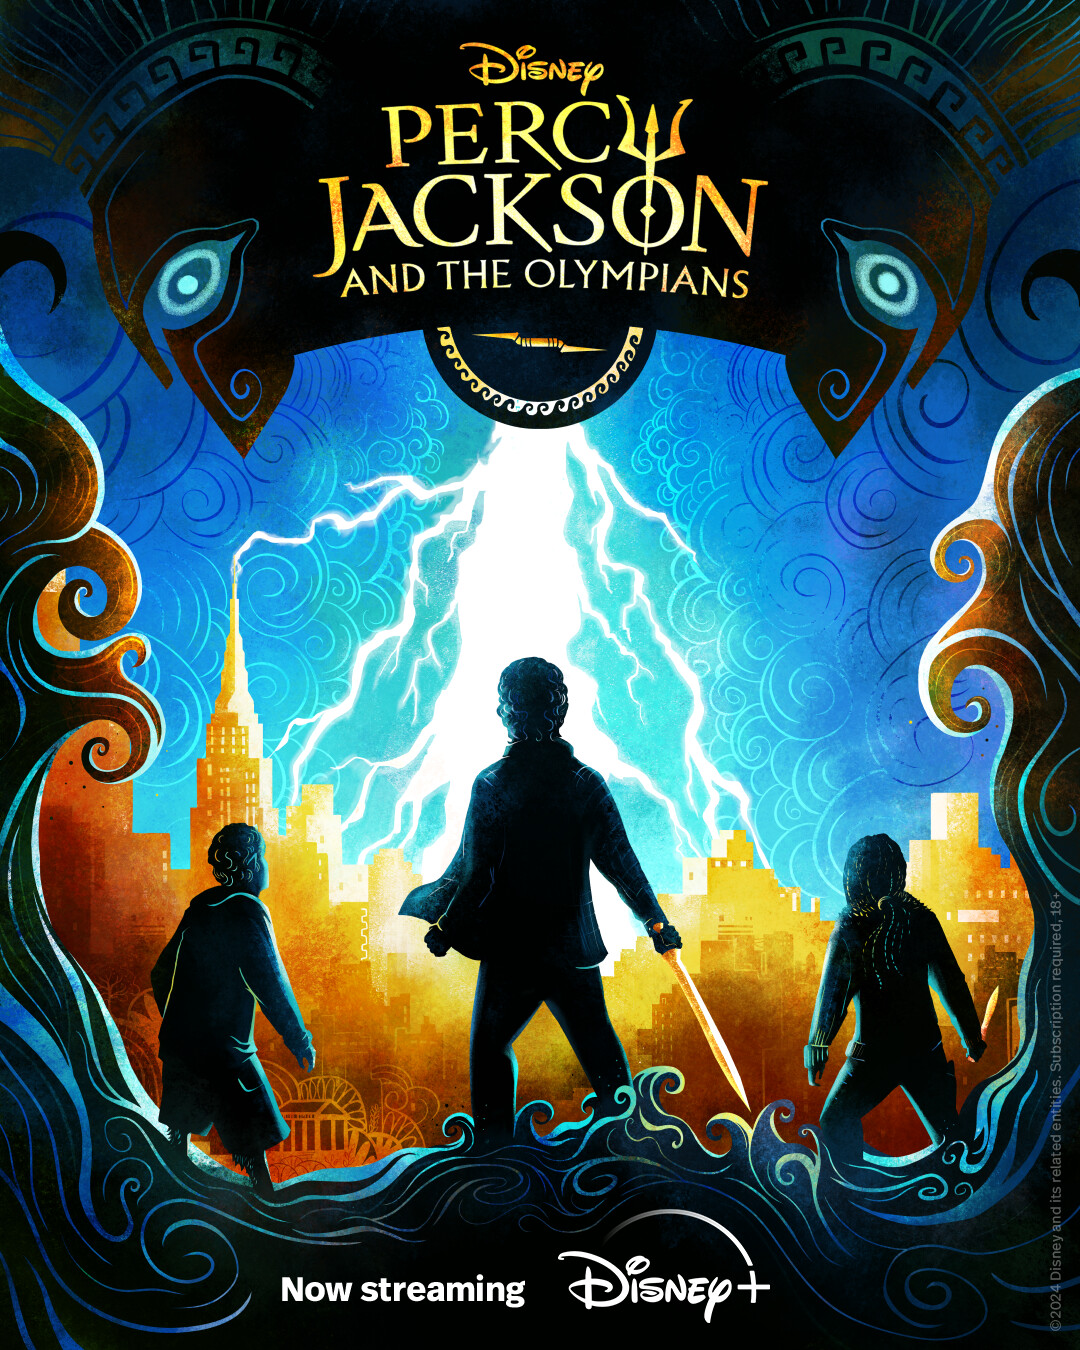 PERCY JACKSON AND THE OLYMPIANS